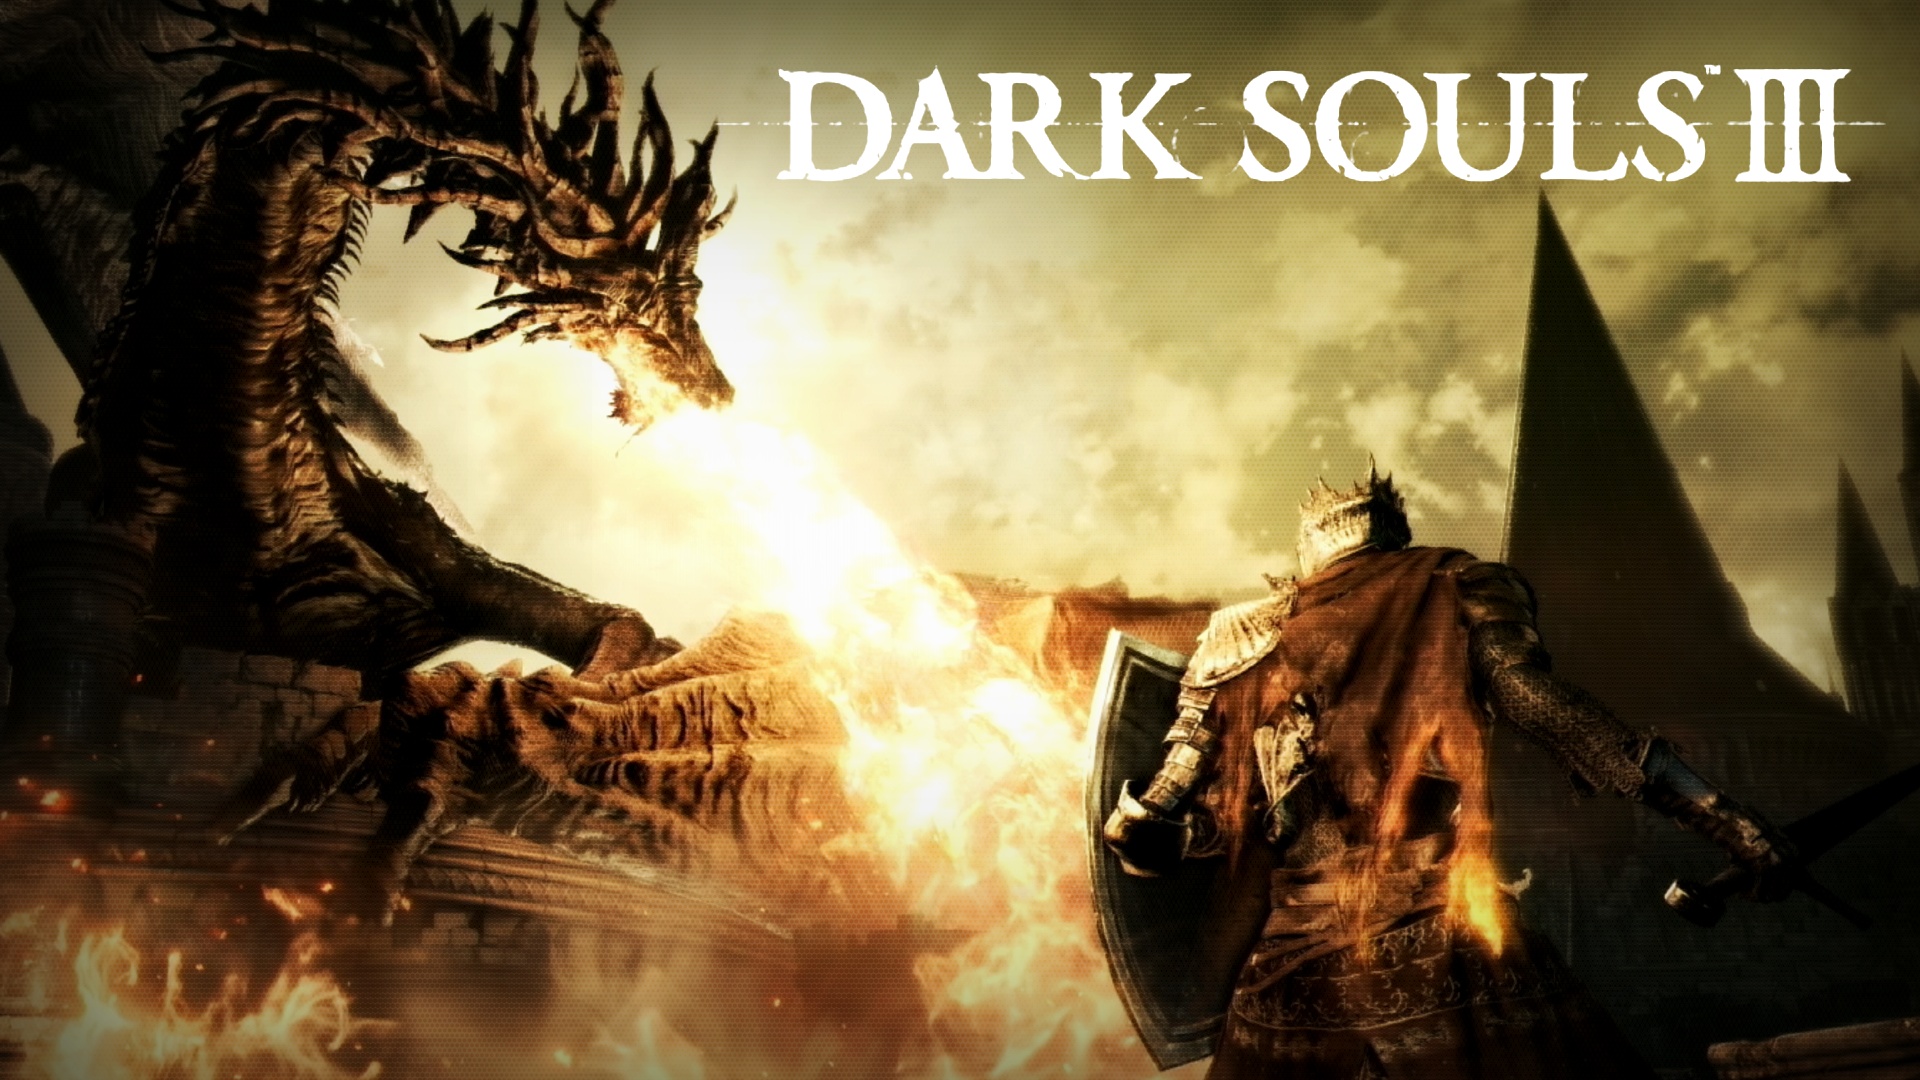  29 2015 By Stephen Comments Off on Dark Souls 3 HD Wallpaper